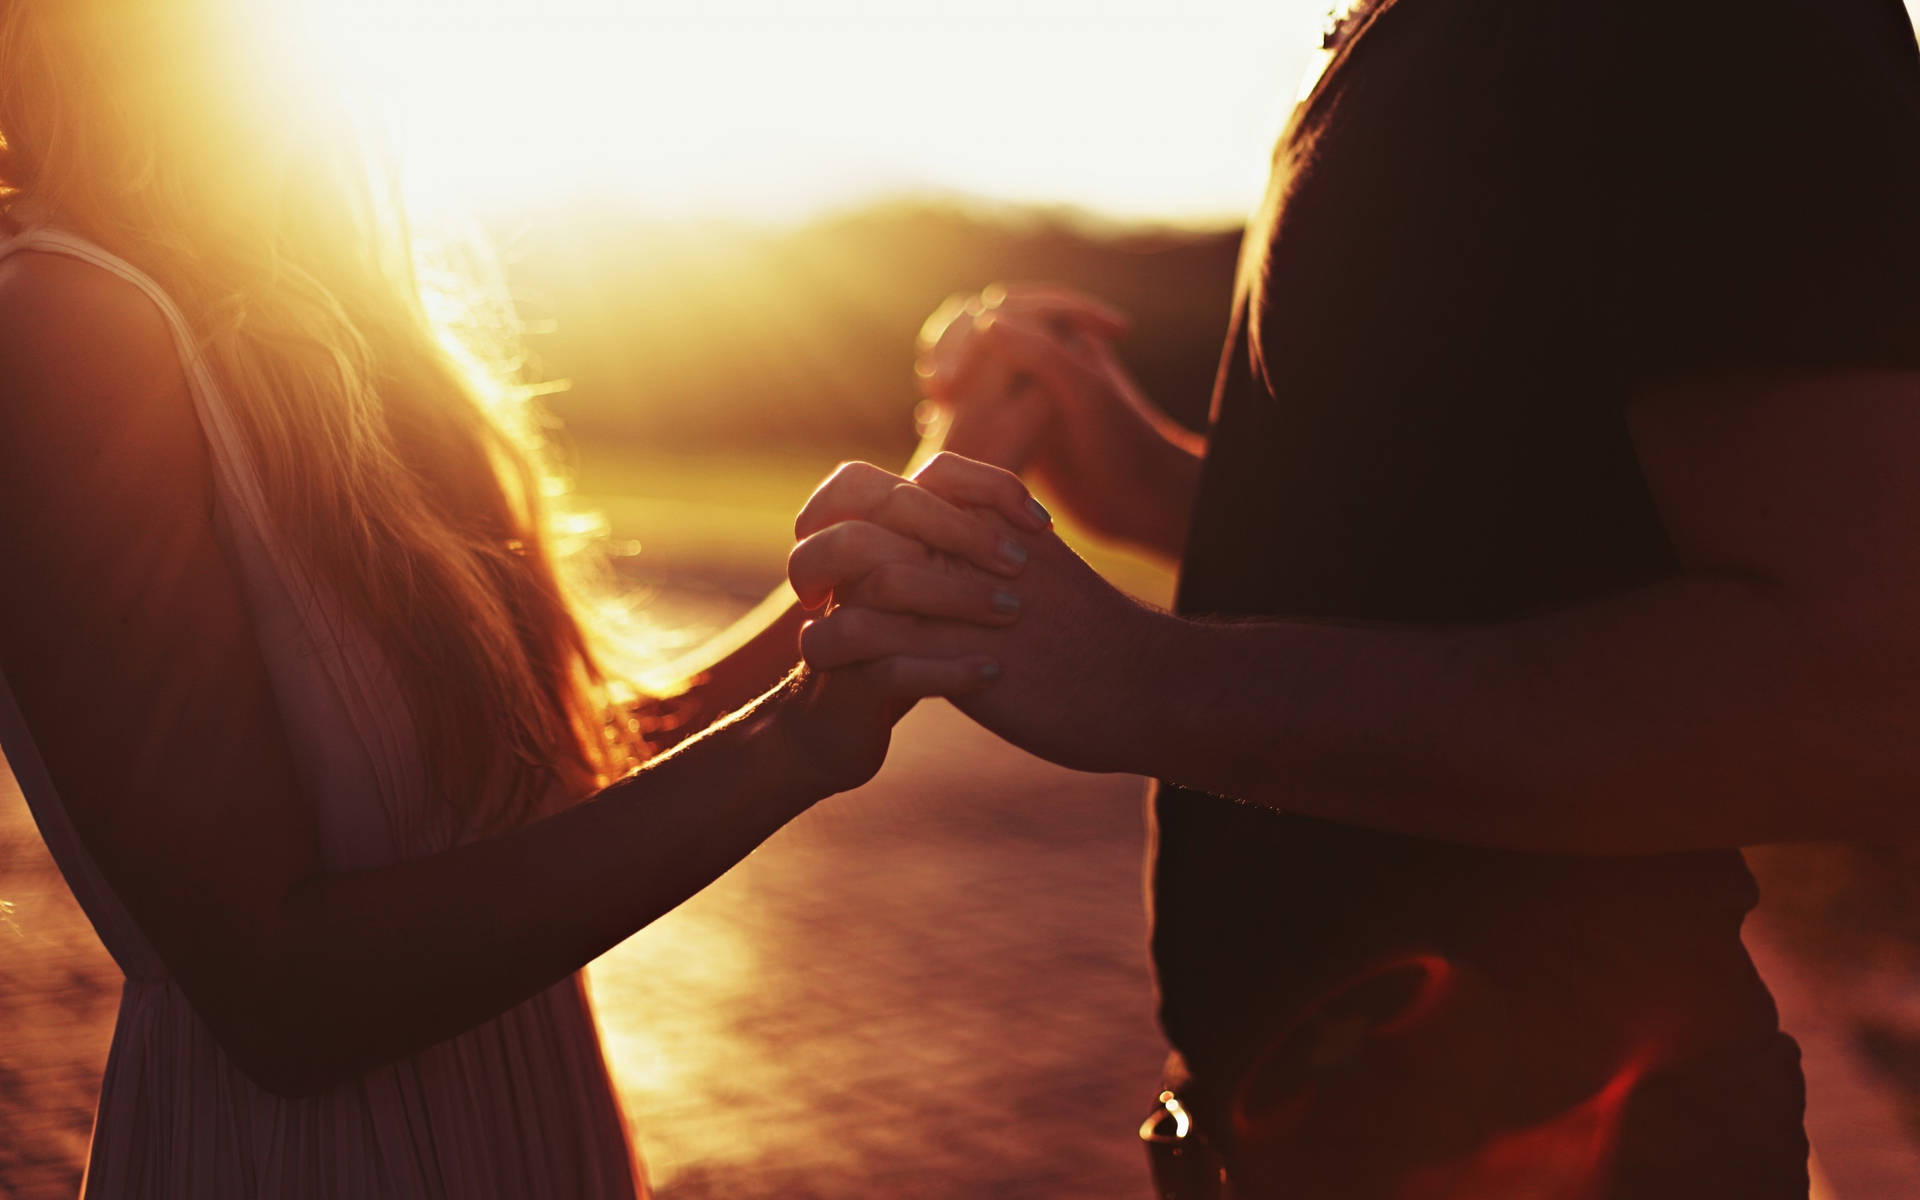 Holding Hands While Facing Each Other At Sunset Wallpaper